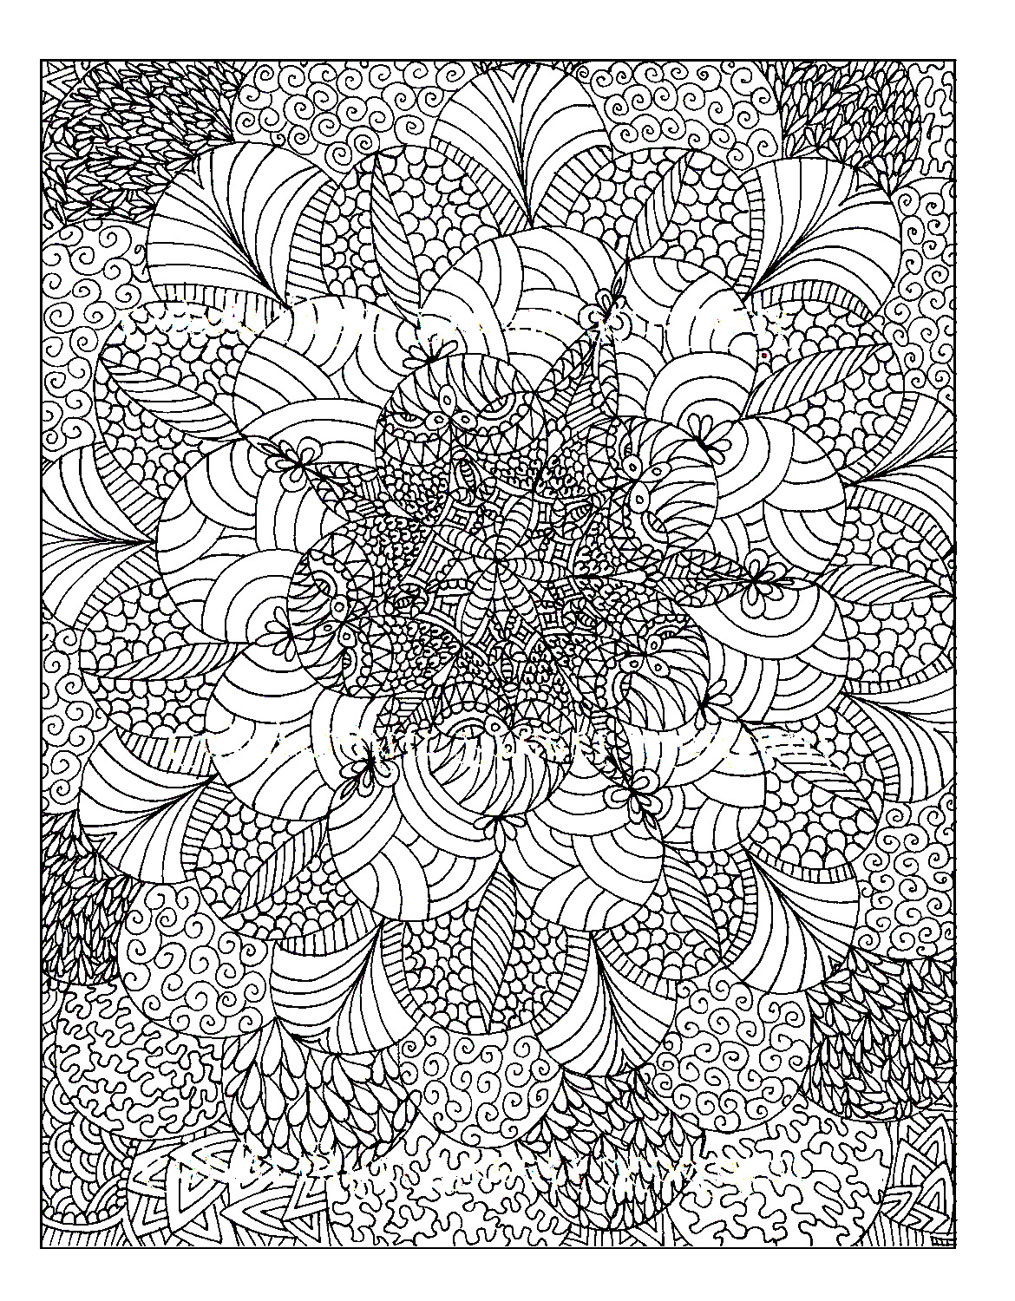 wellbeing wednesday colouring in for adults relaxation